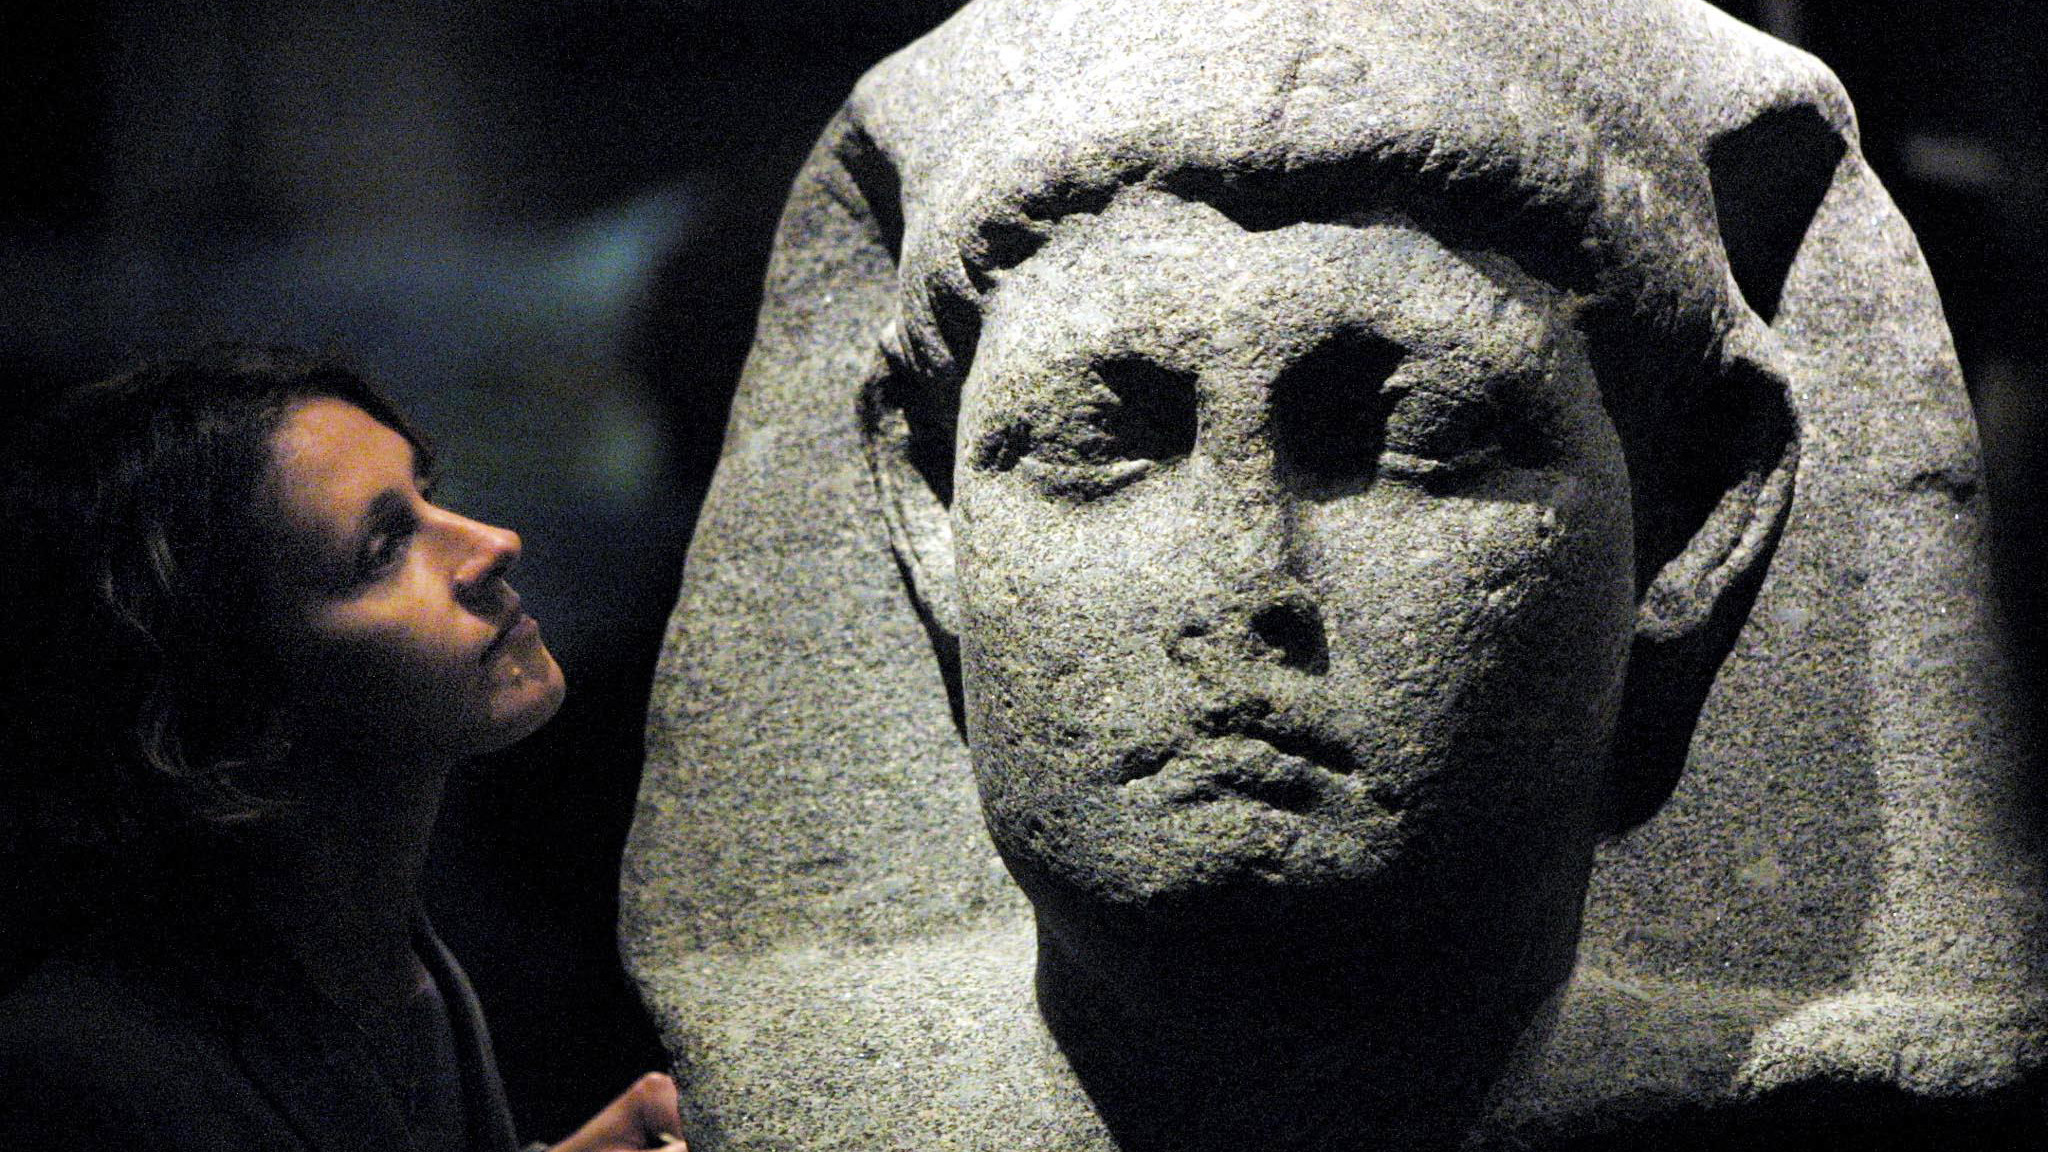 Sally-Ann Ashton admires one of the statues of Cleopatra at the launch of an exhibition at the British Museum in London in 2001.